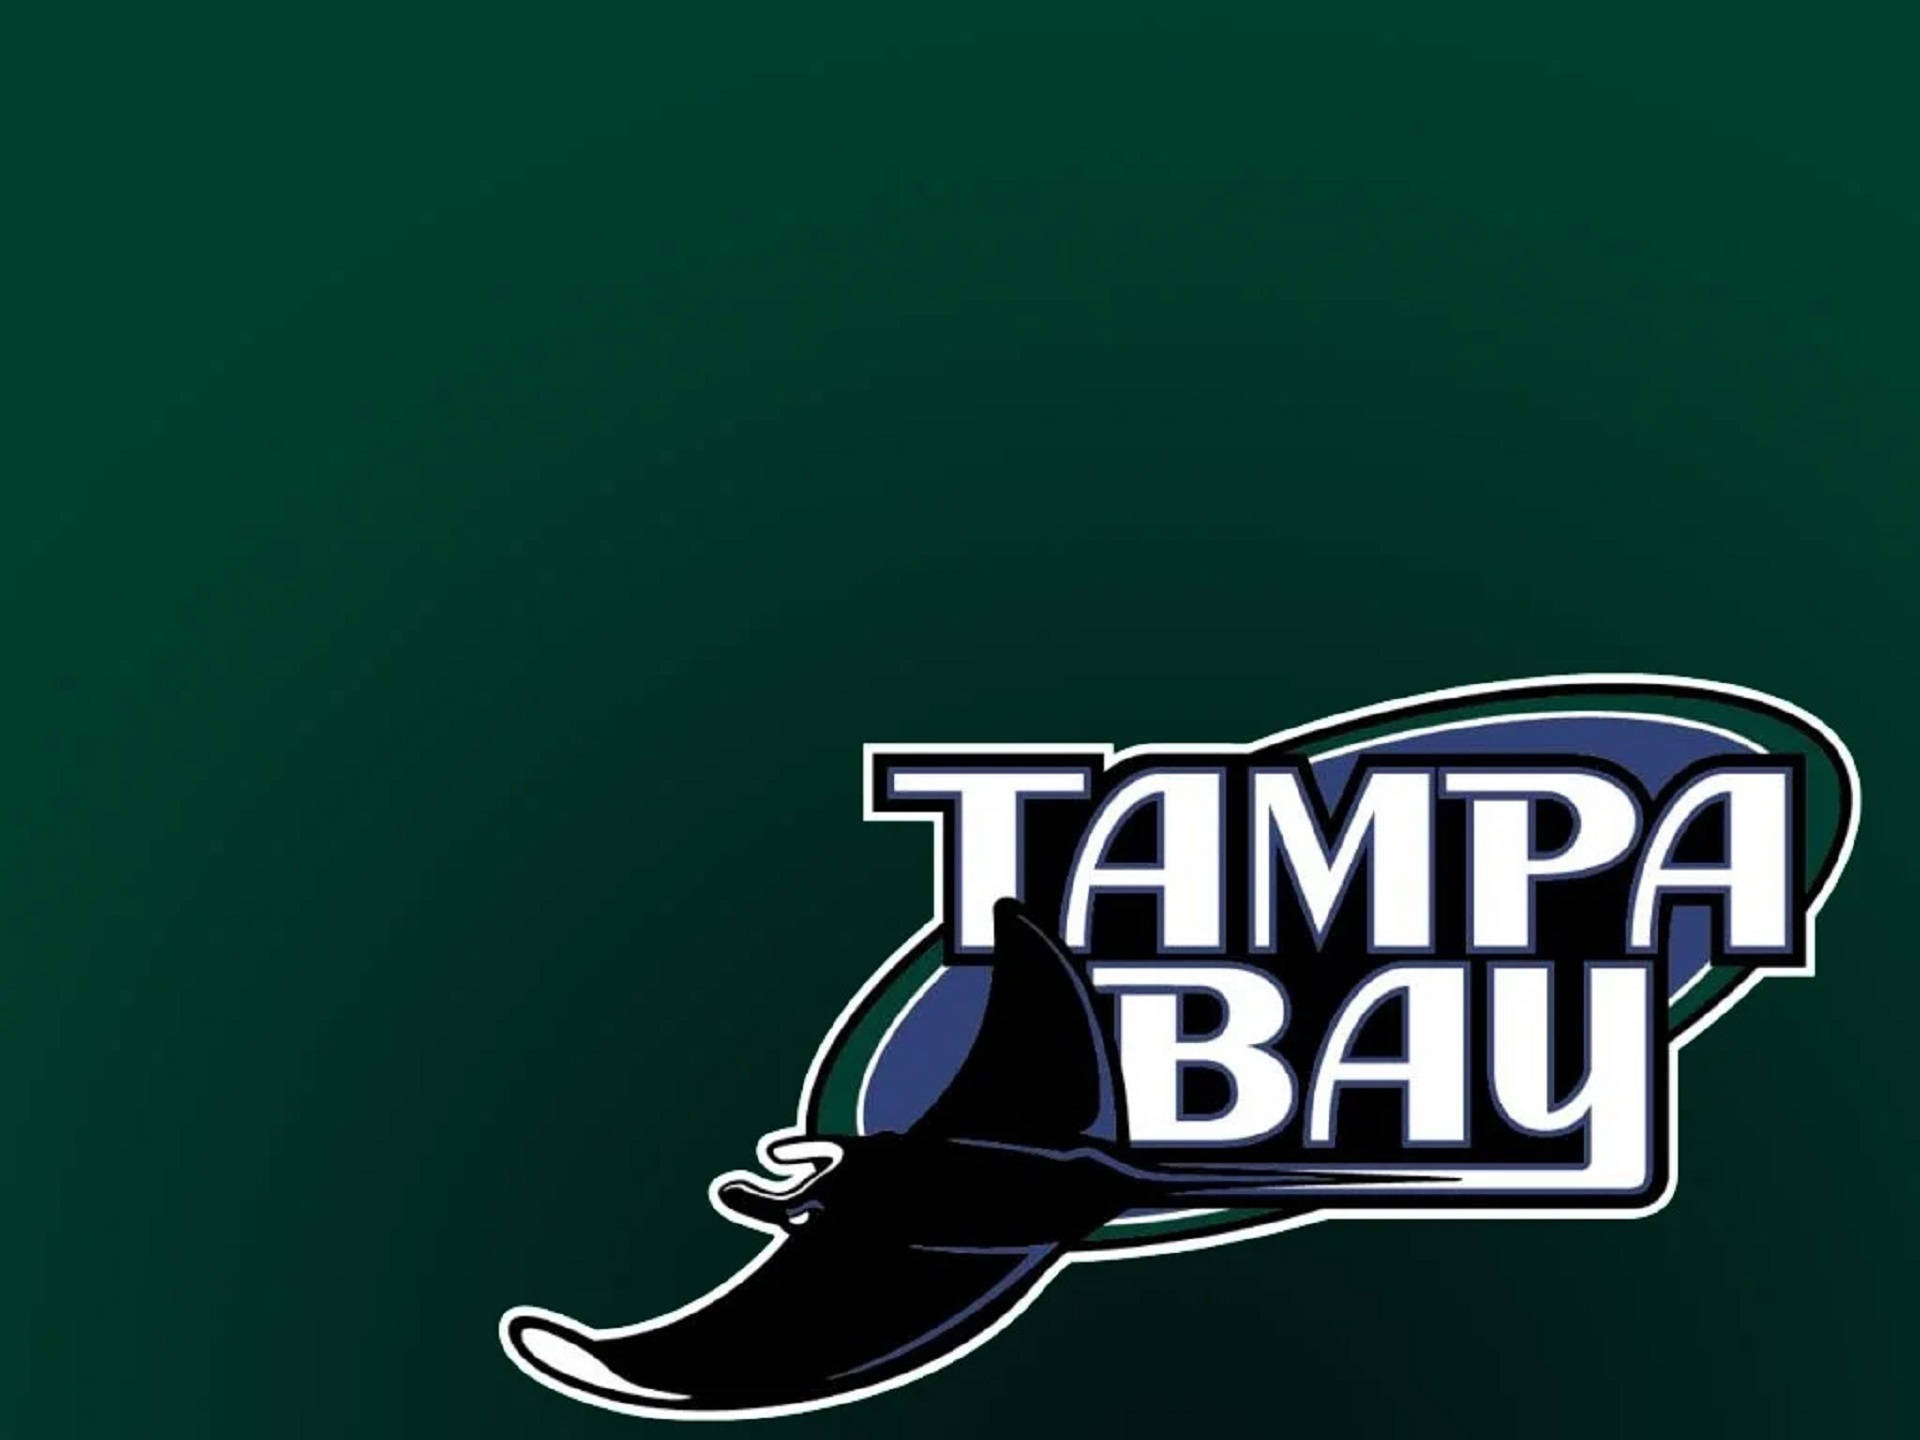 Tampa Bay Rays In Green Background